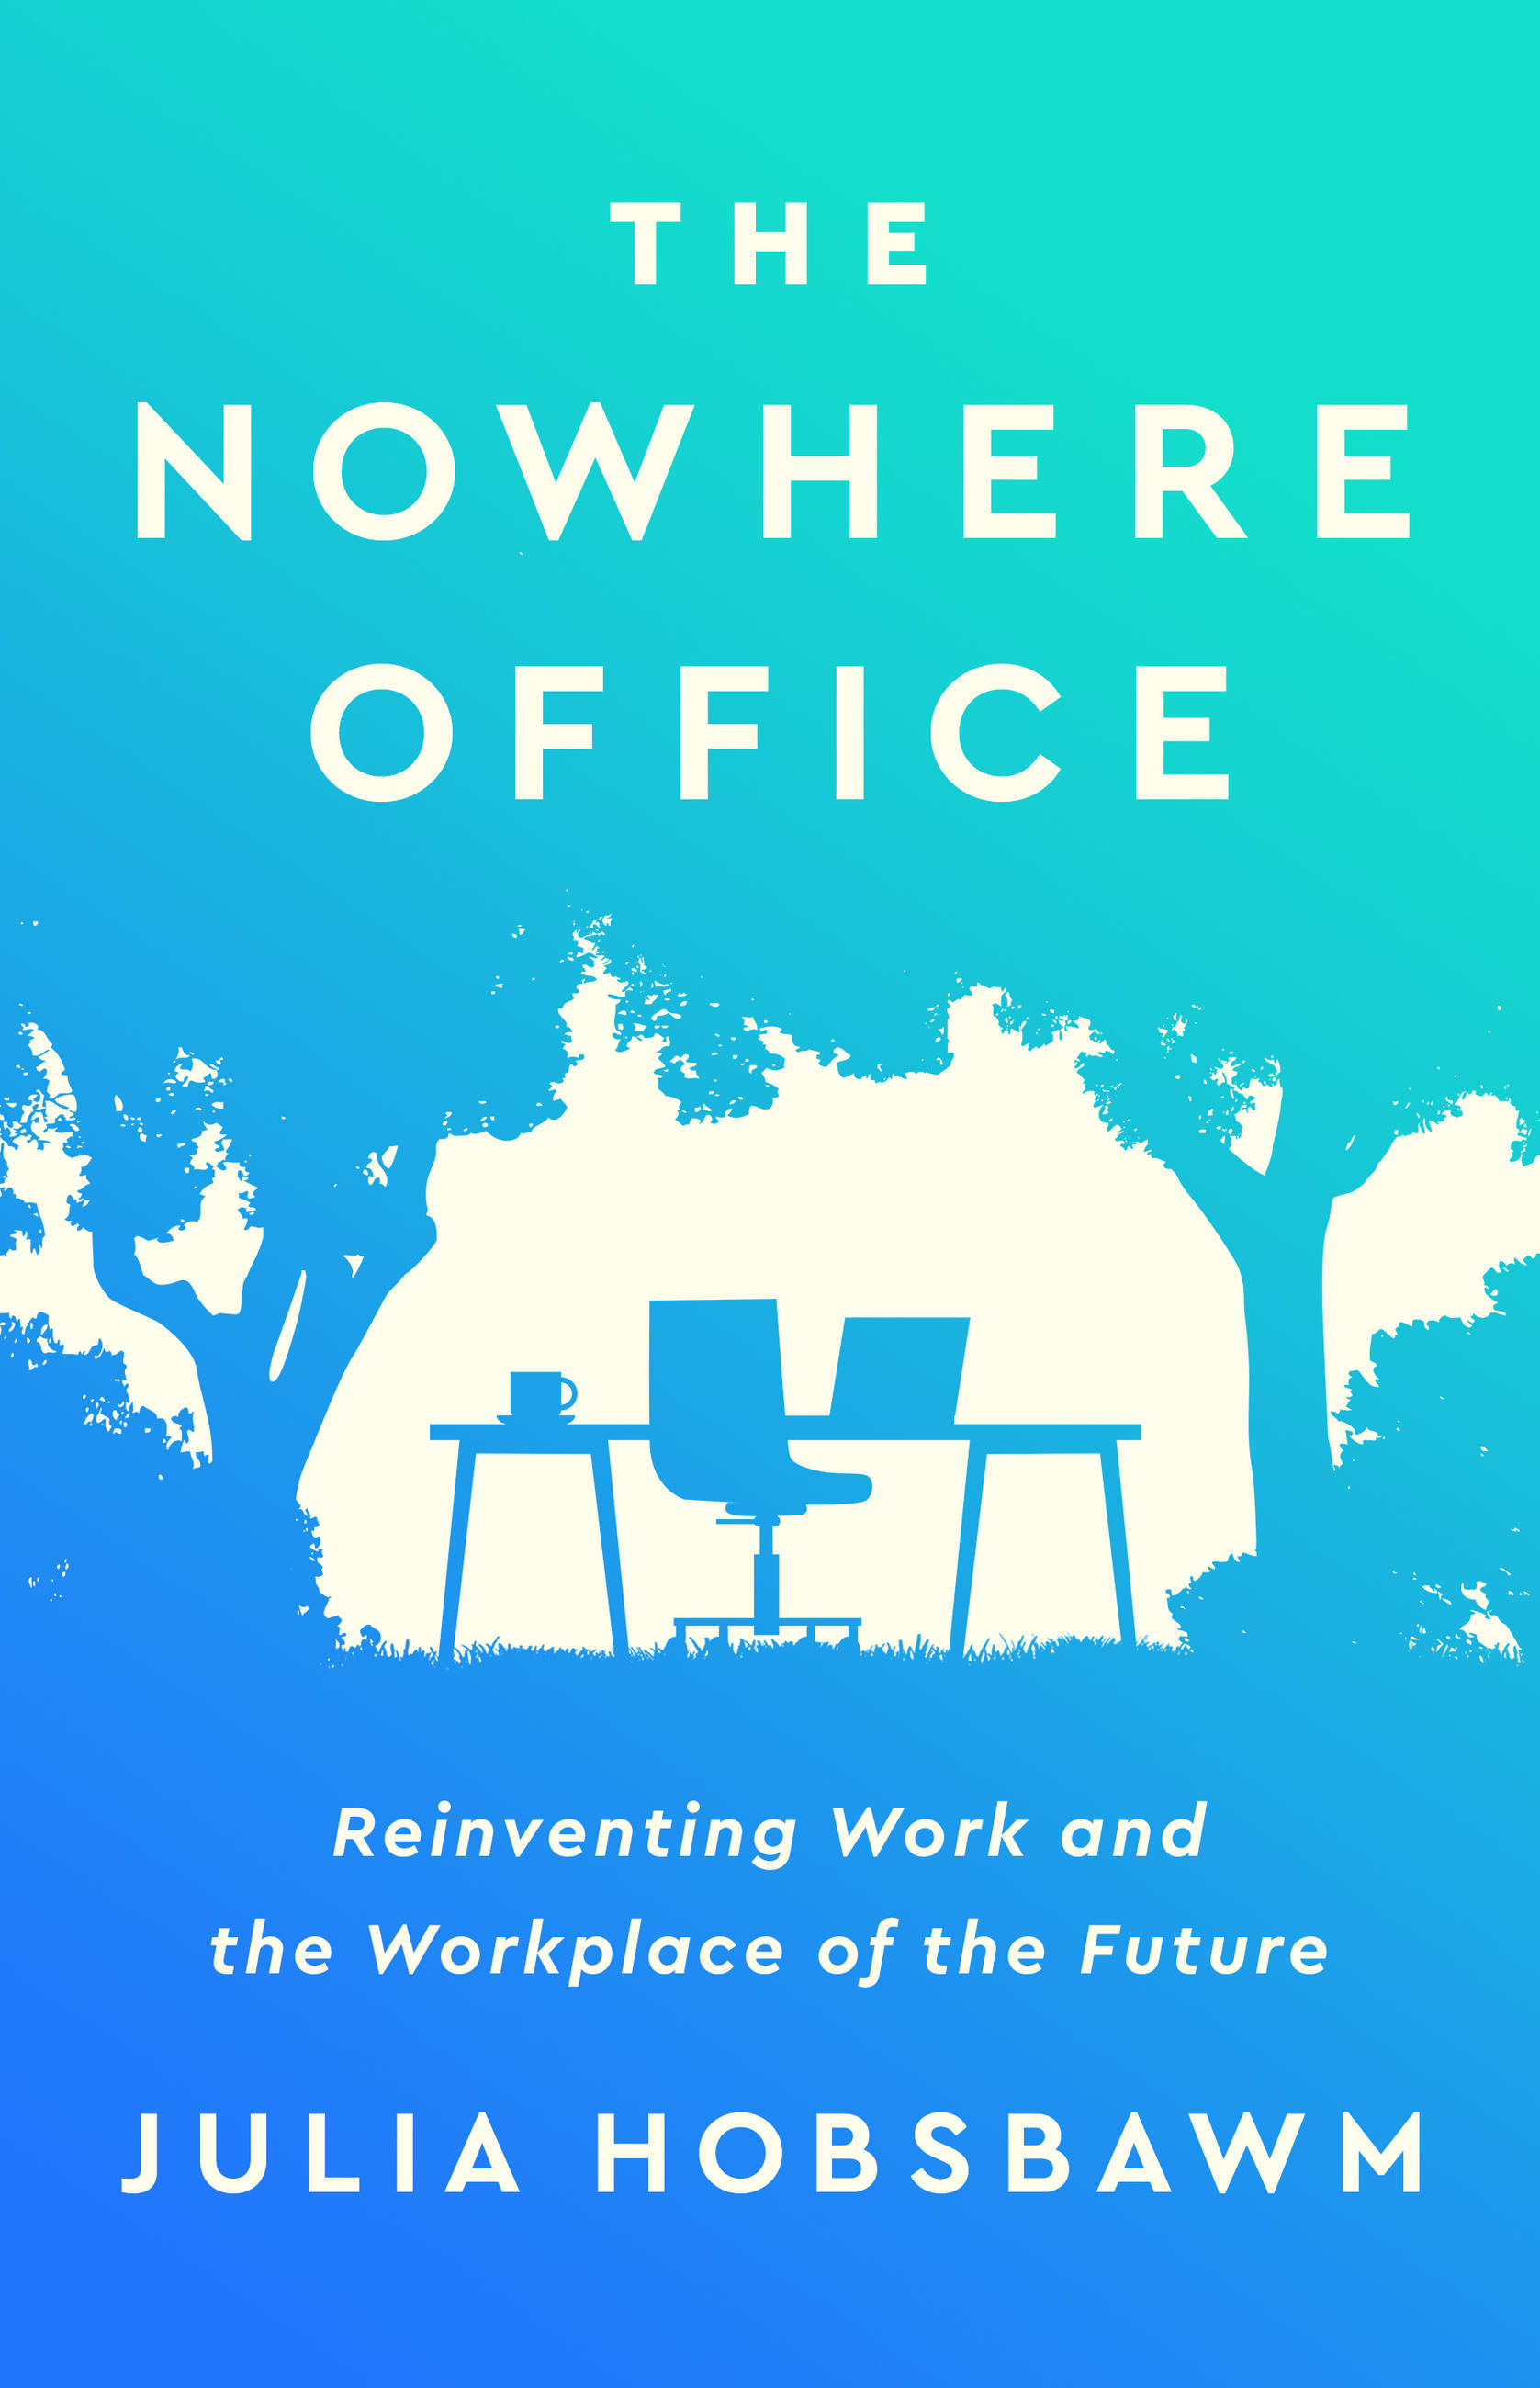 The Nowhere Office by Julia Hobsbawm | PublicAffairs